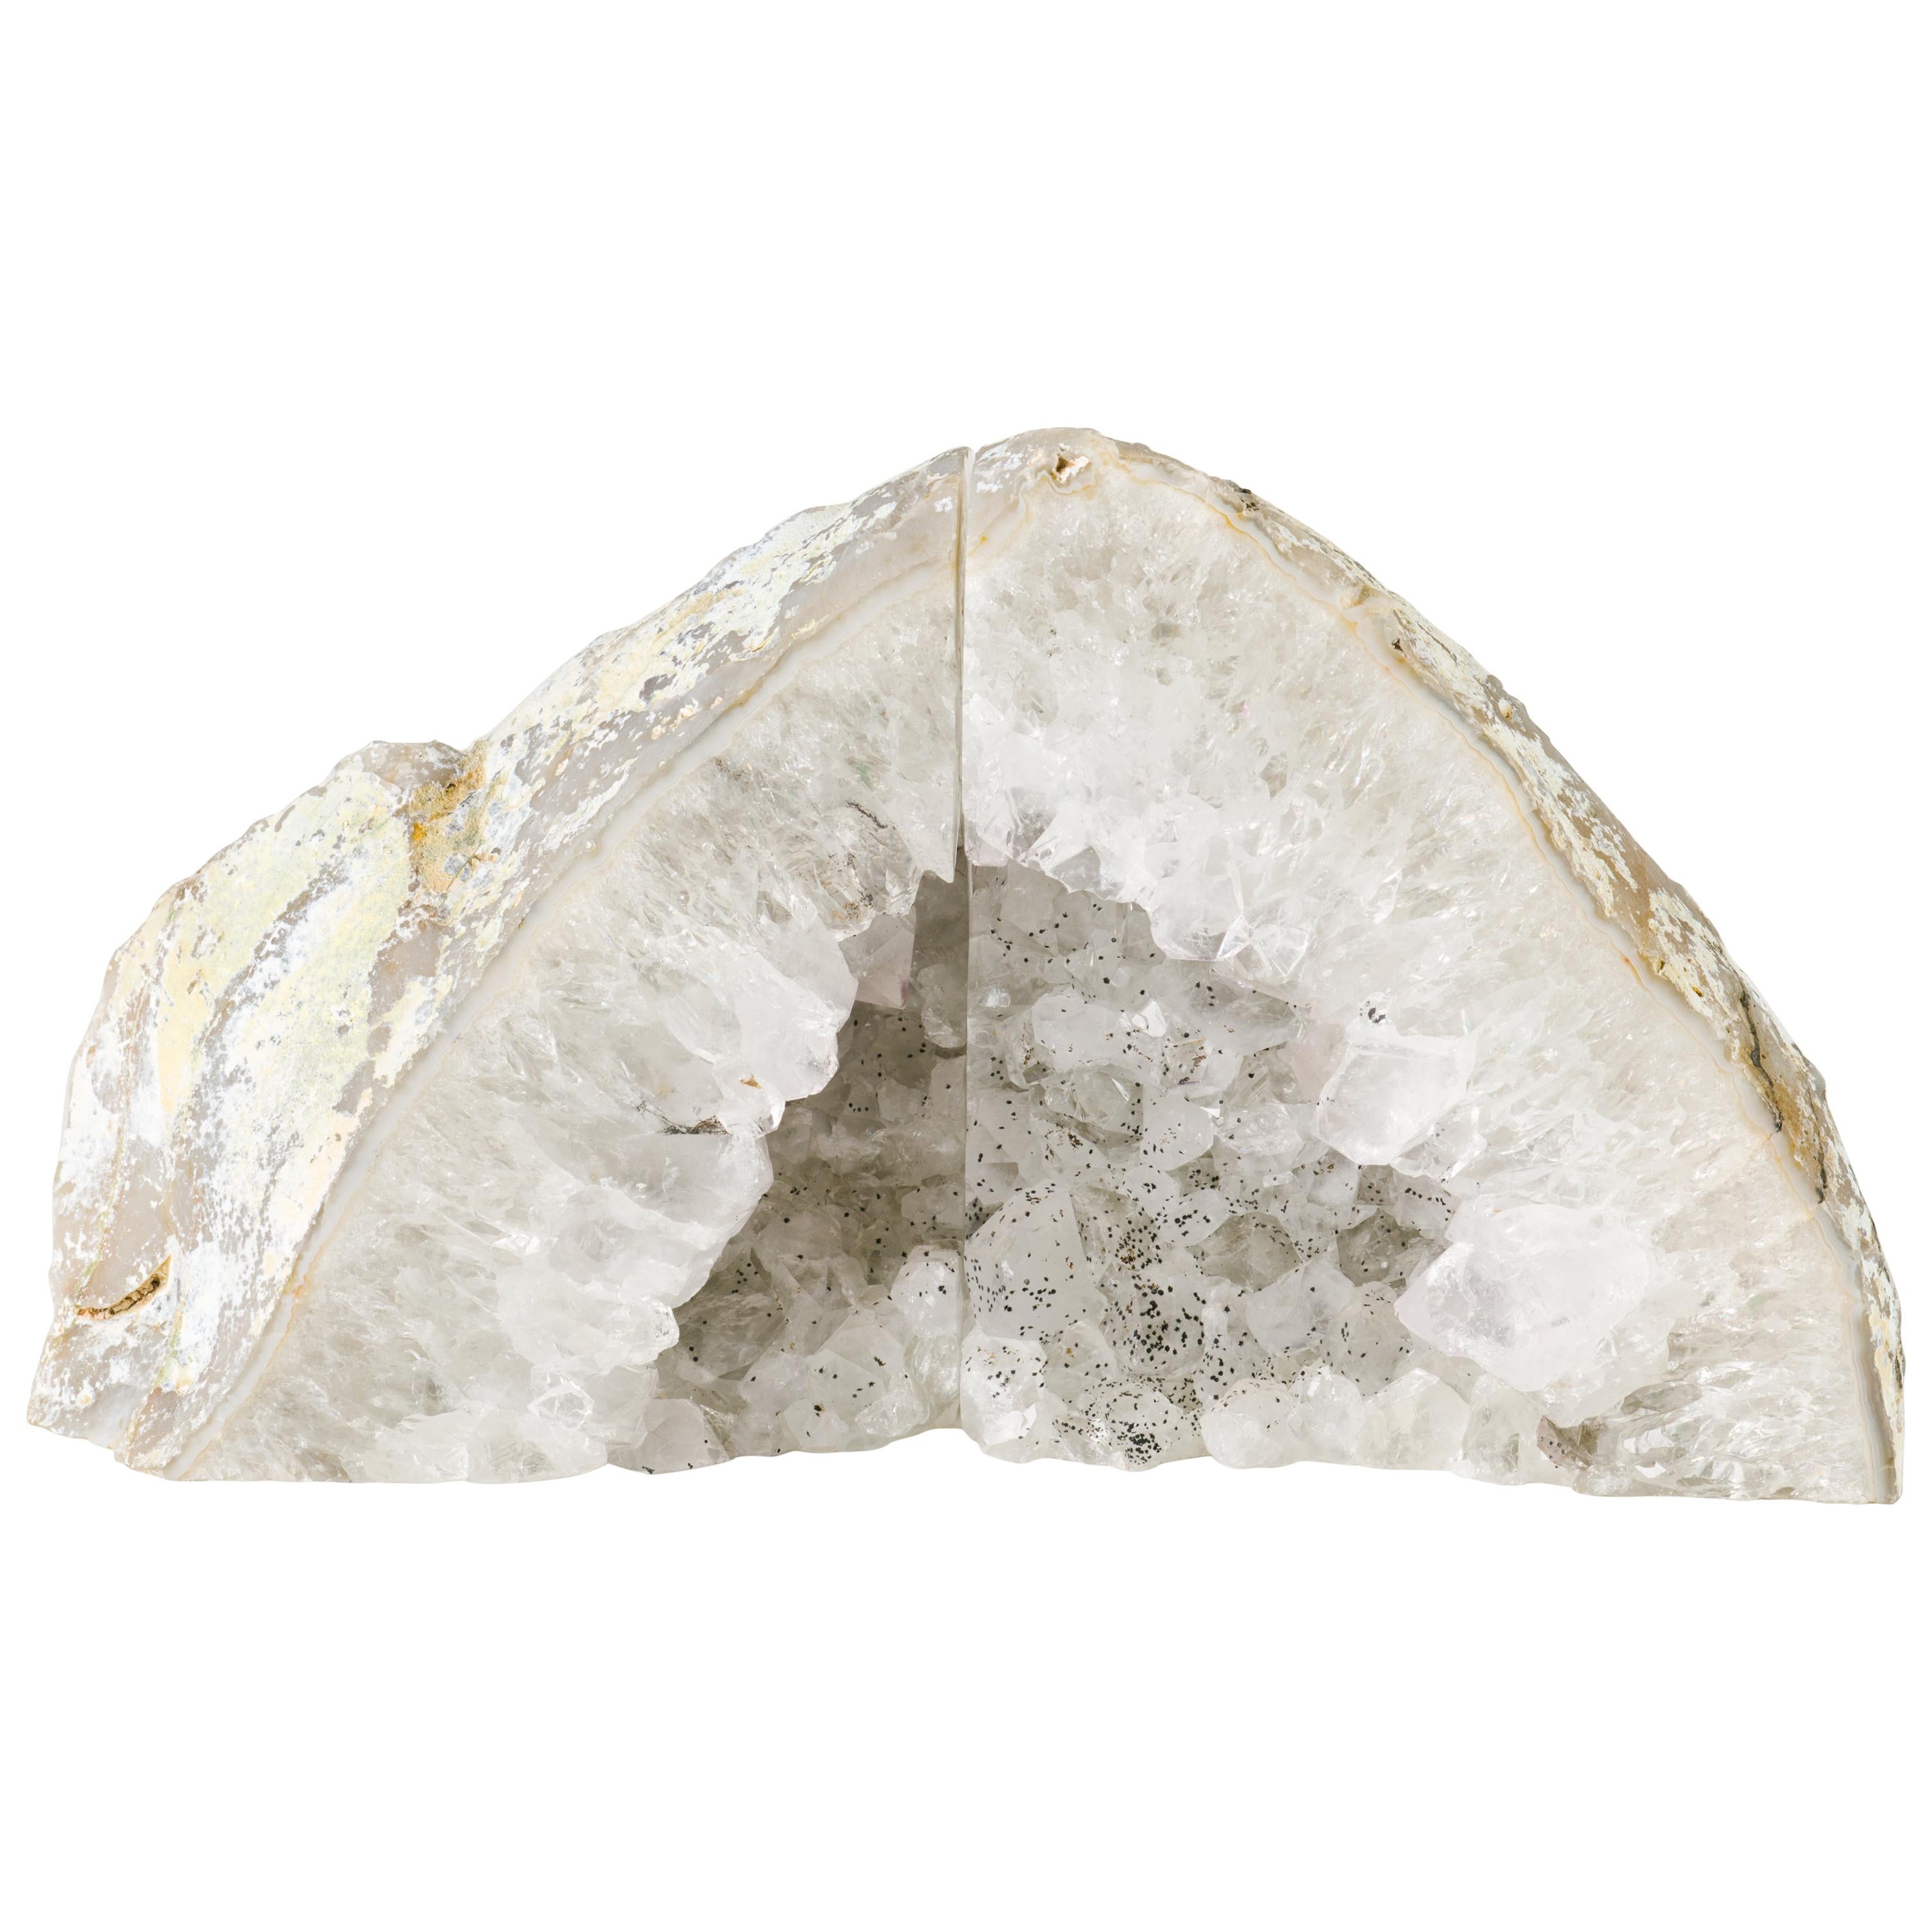 Pair of natural quartz crystal specimens with polished fronts and gorgeous rock crystal centres. The bookends have varying hues of white and silver and feature unusual speckles in gunmetal or black. Stunning from all angles and completely different